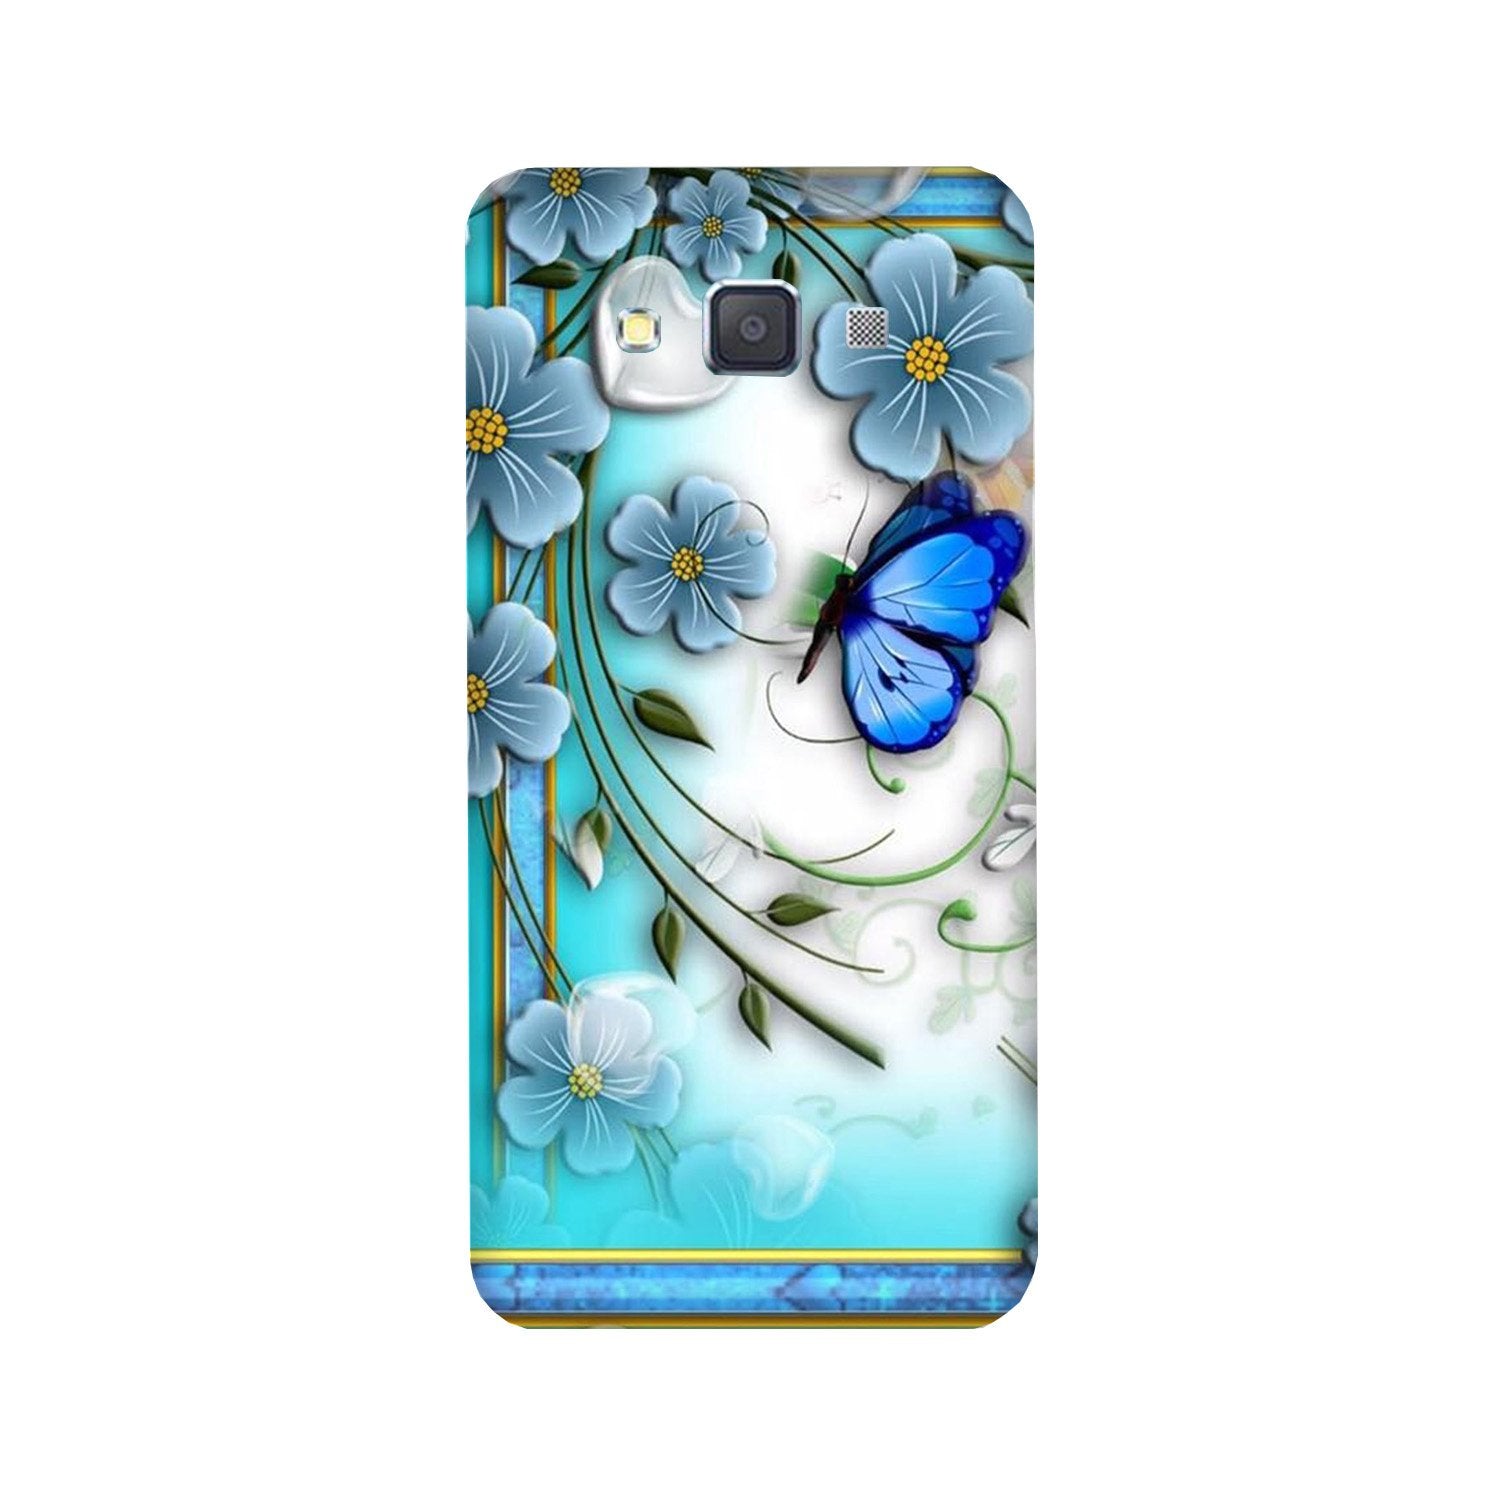 Blue Butterfly Case for Galaxy Grand Prime